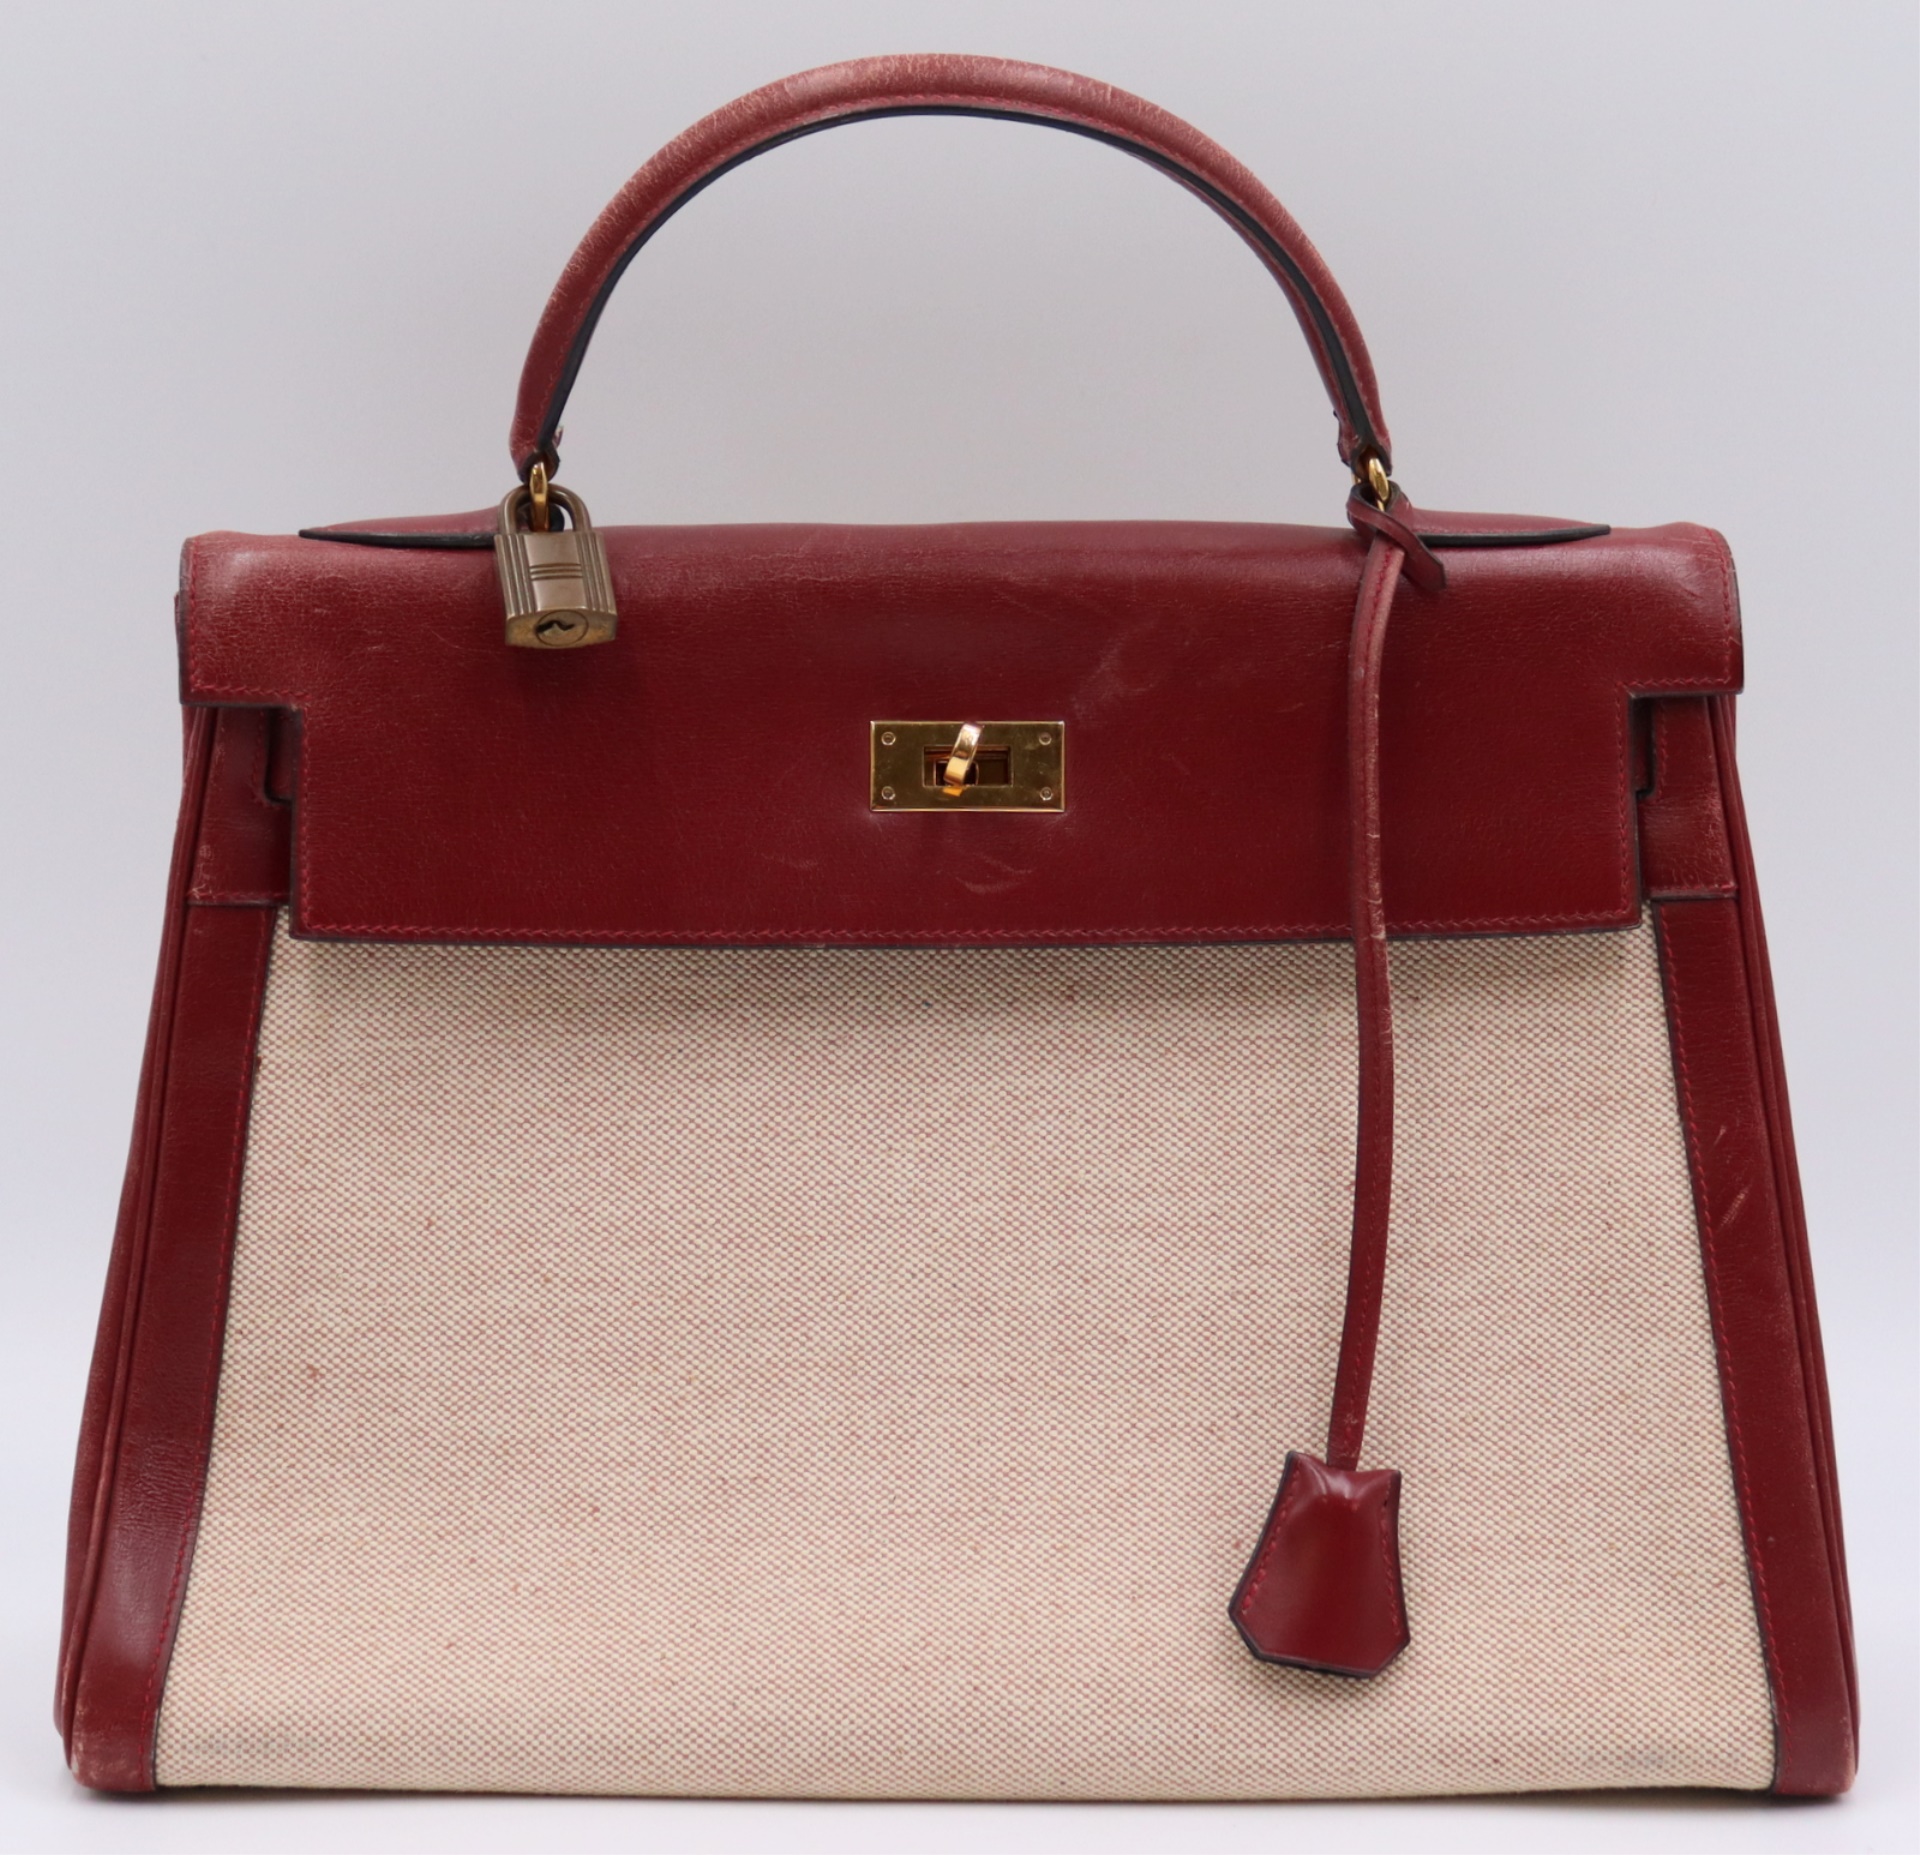 COUTURE HERMES TOILE KELLY SELLIER 3be621